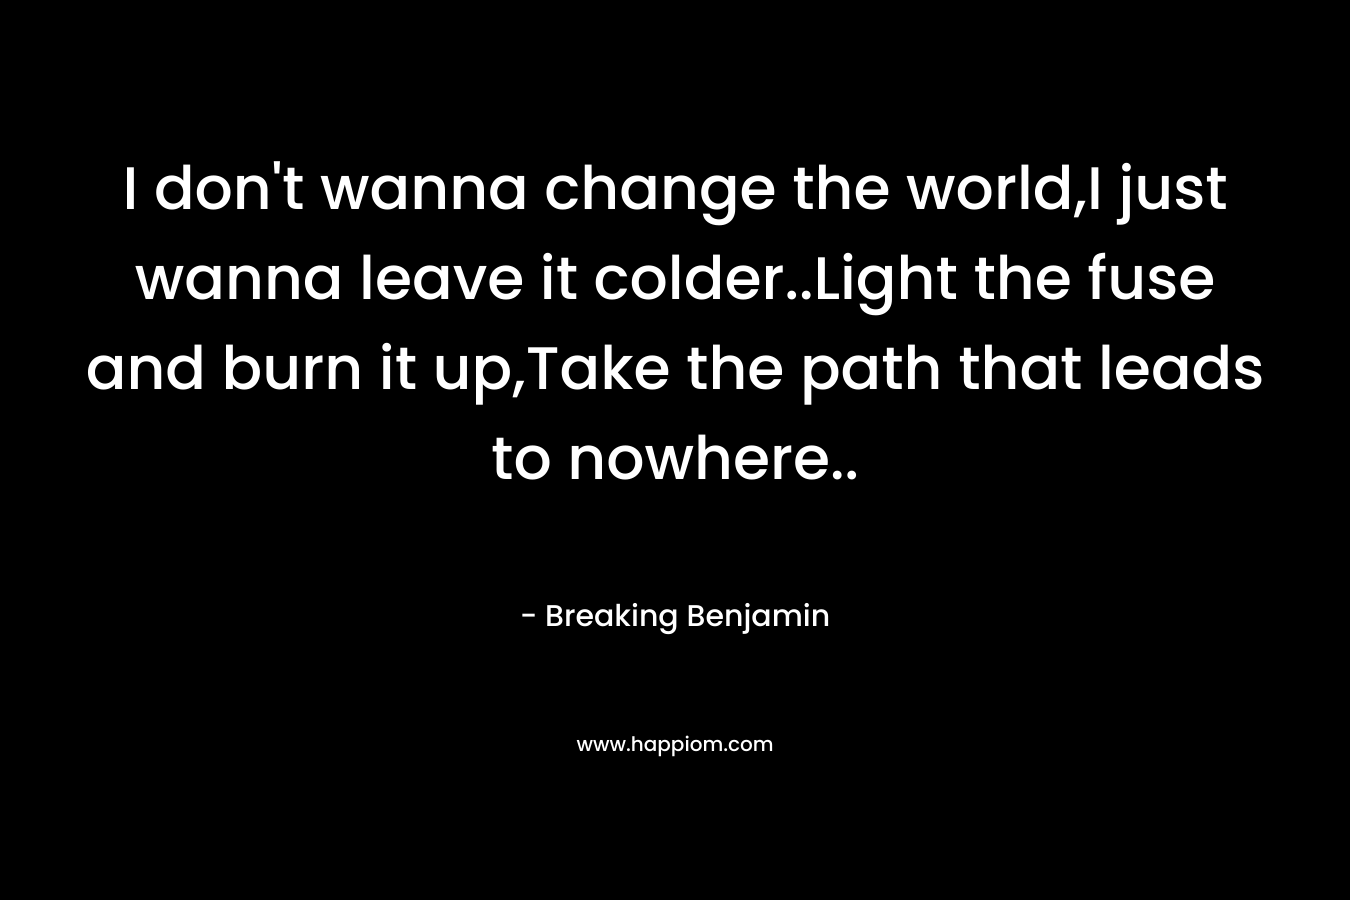 I don't wanna change the world,I just wanna leave it colder..Light the fuse and burn it up,Take the path that leads to nowhere..